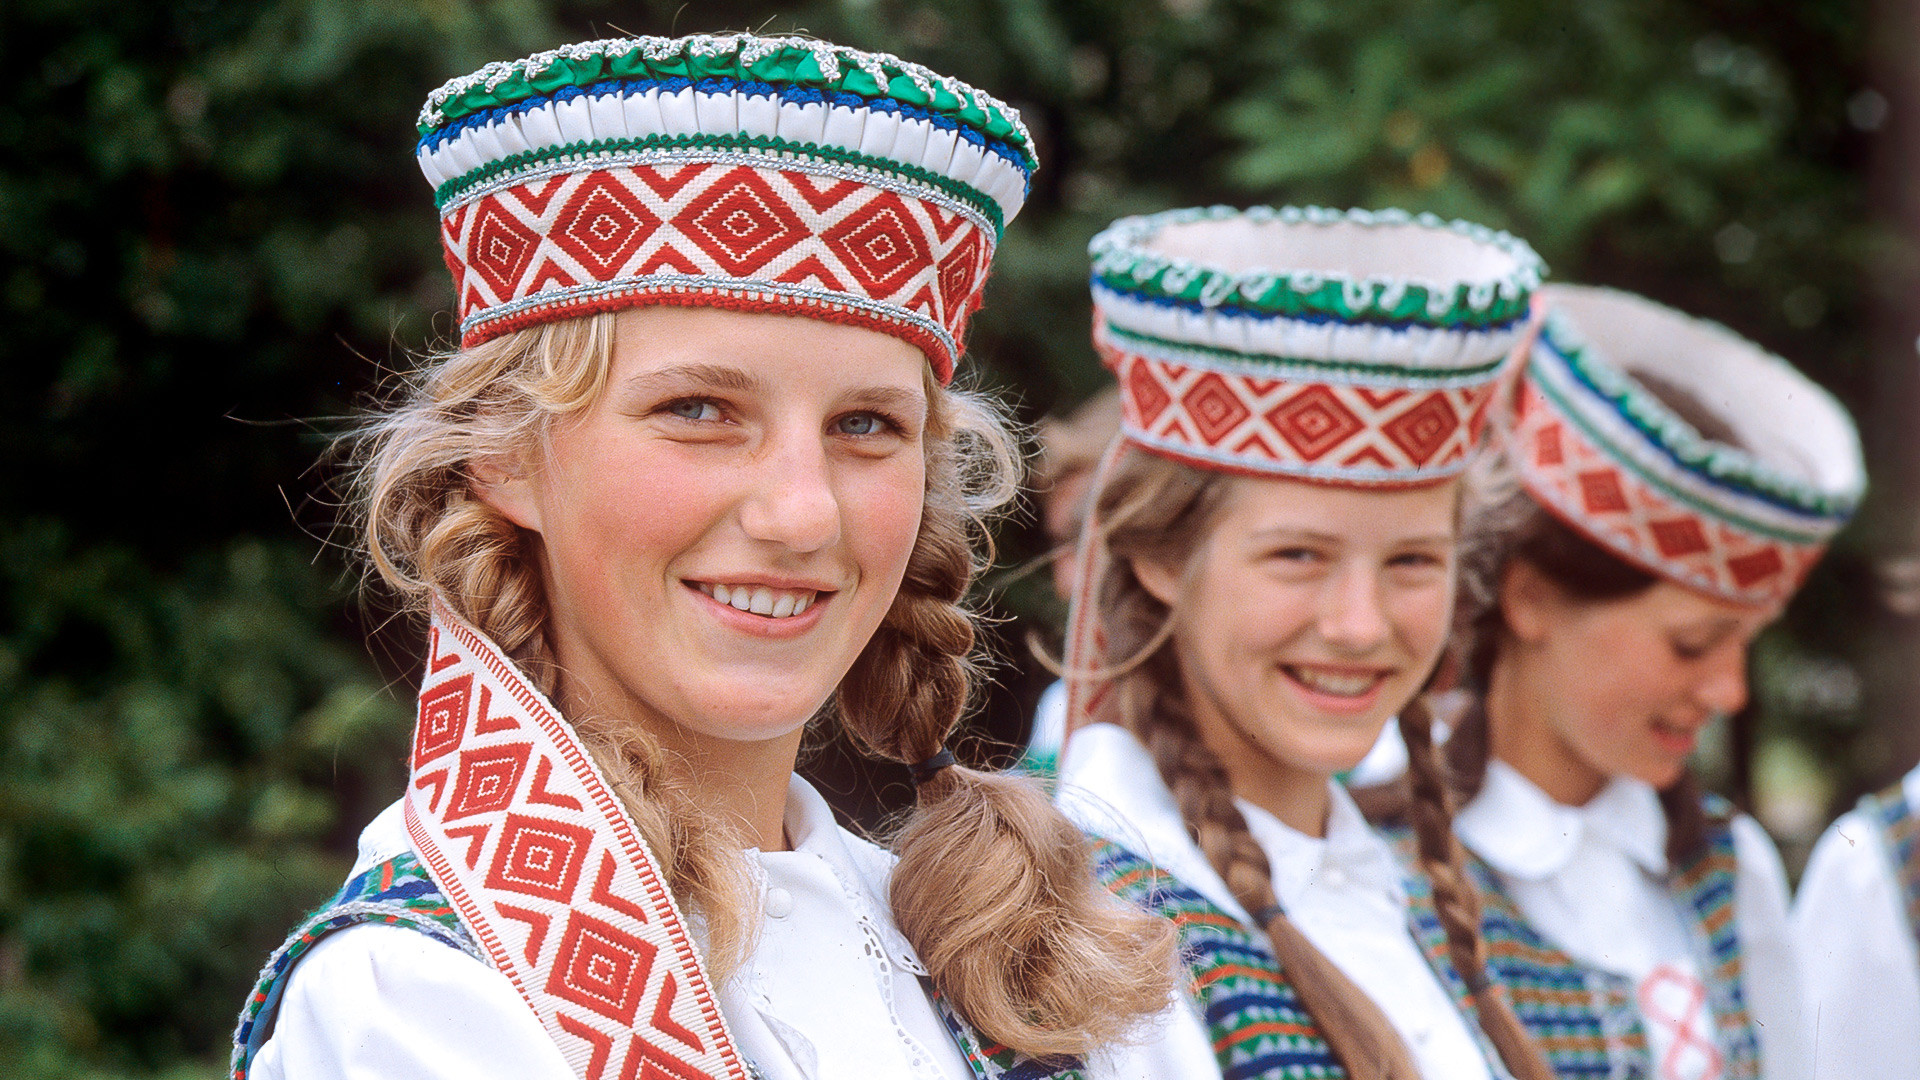 Lithuanian girls in national dresses, 1984.